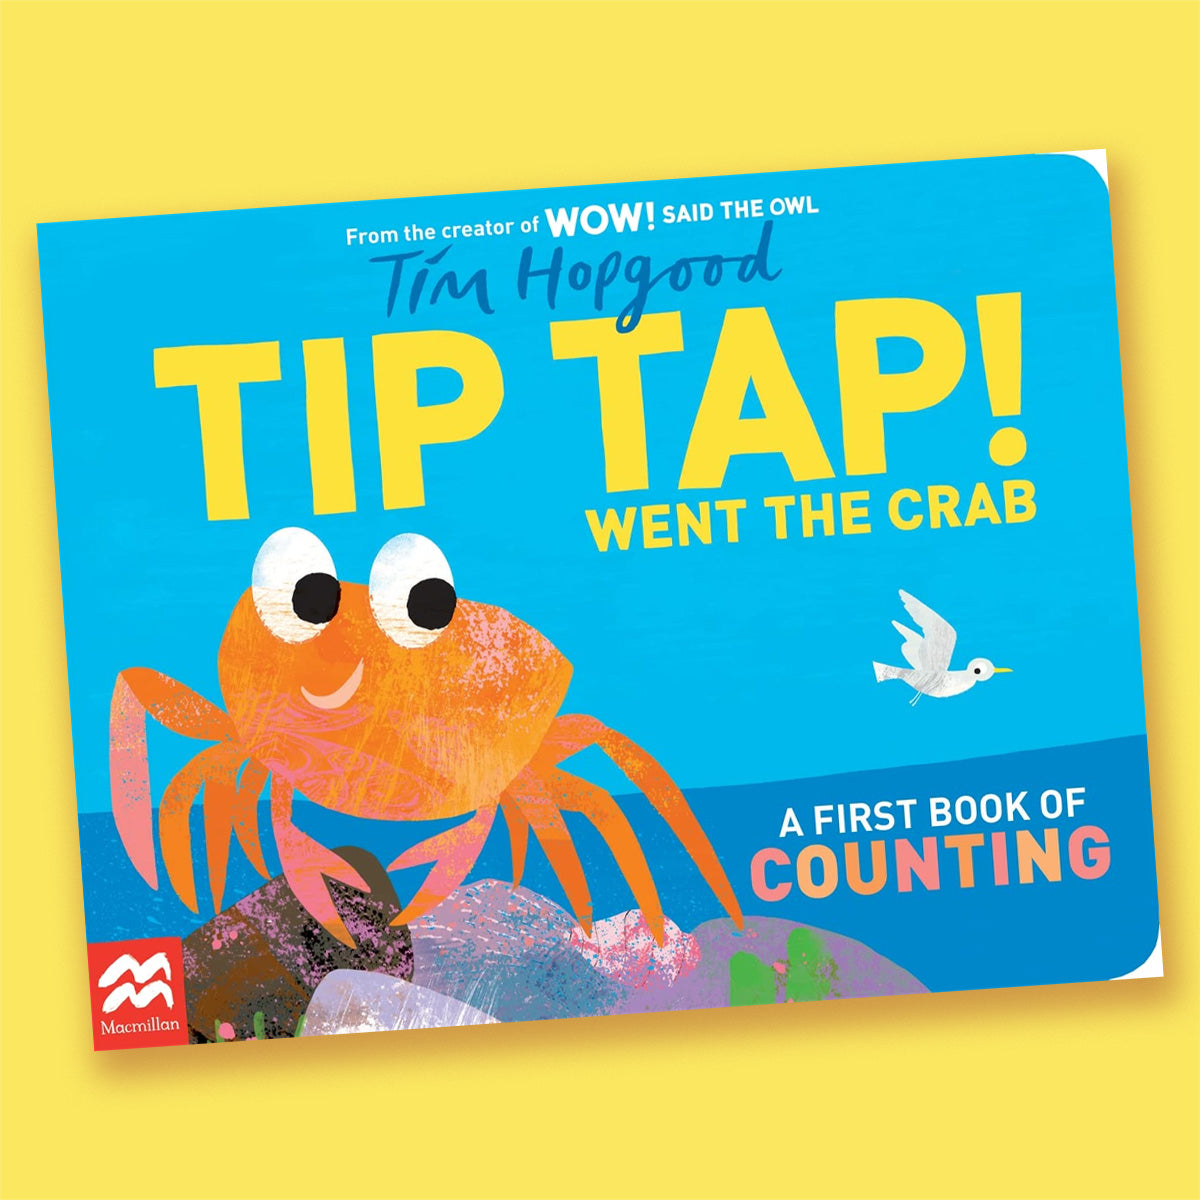 TIP TAP! Went the Crab: A First Book of Counting by Tim Hopgood